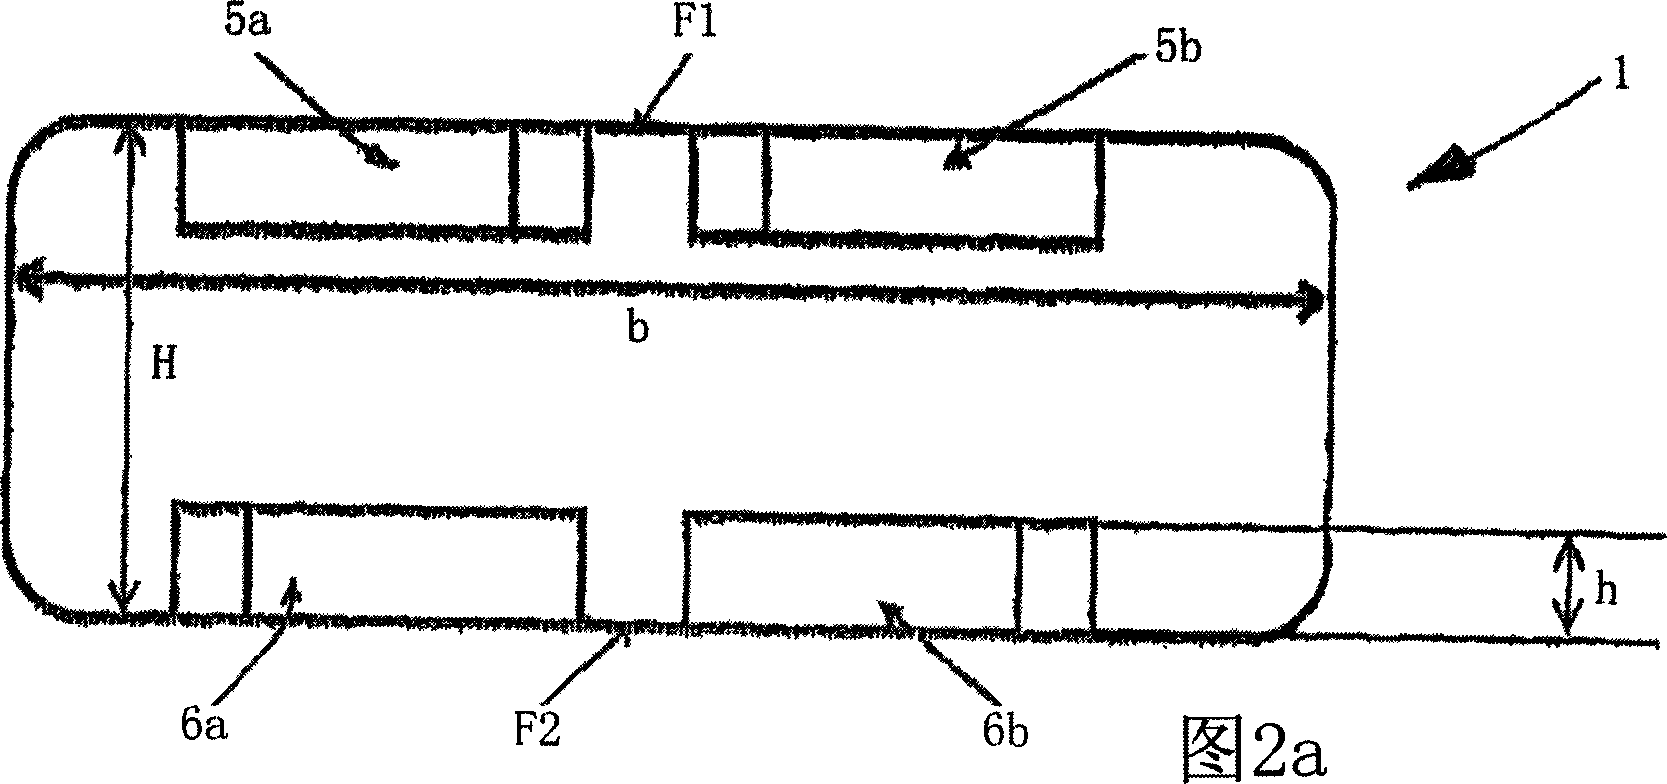 Flow channel for a heat exchanger and heat exchanger with the same